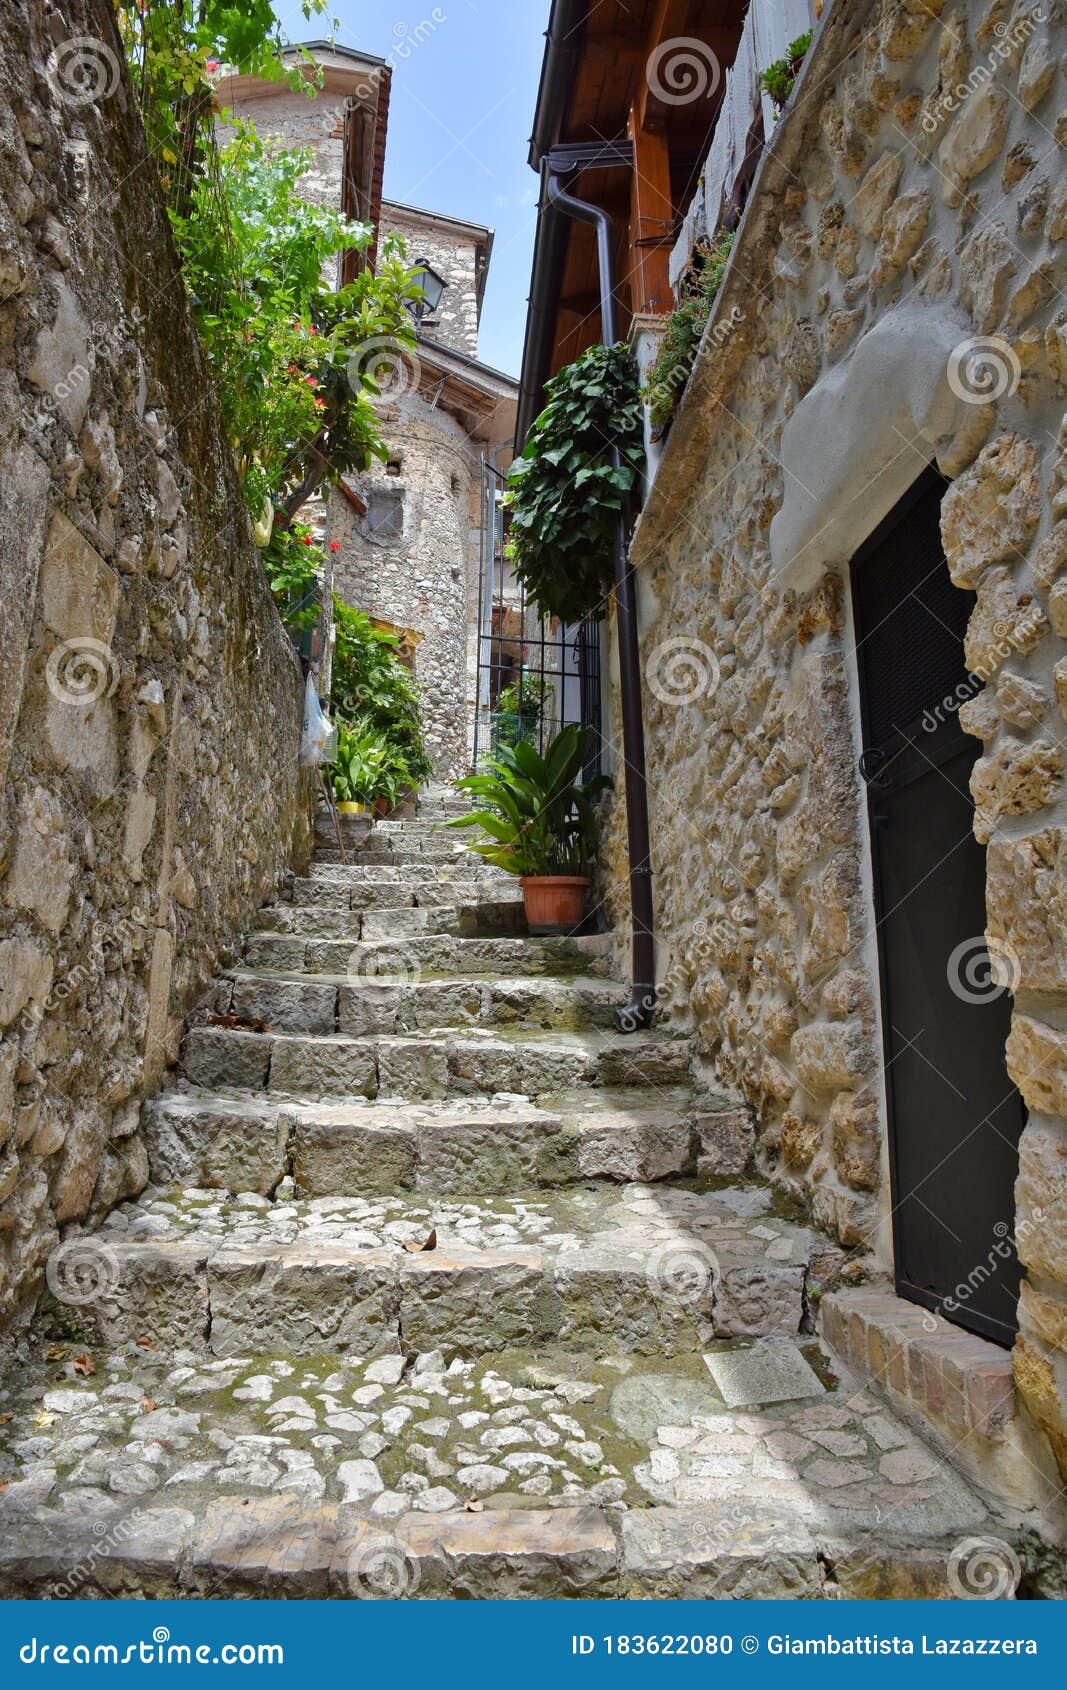 tourism in the village of arce, in frosinone province